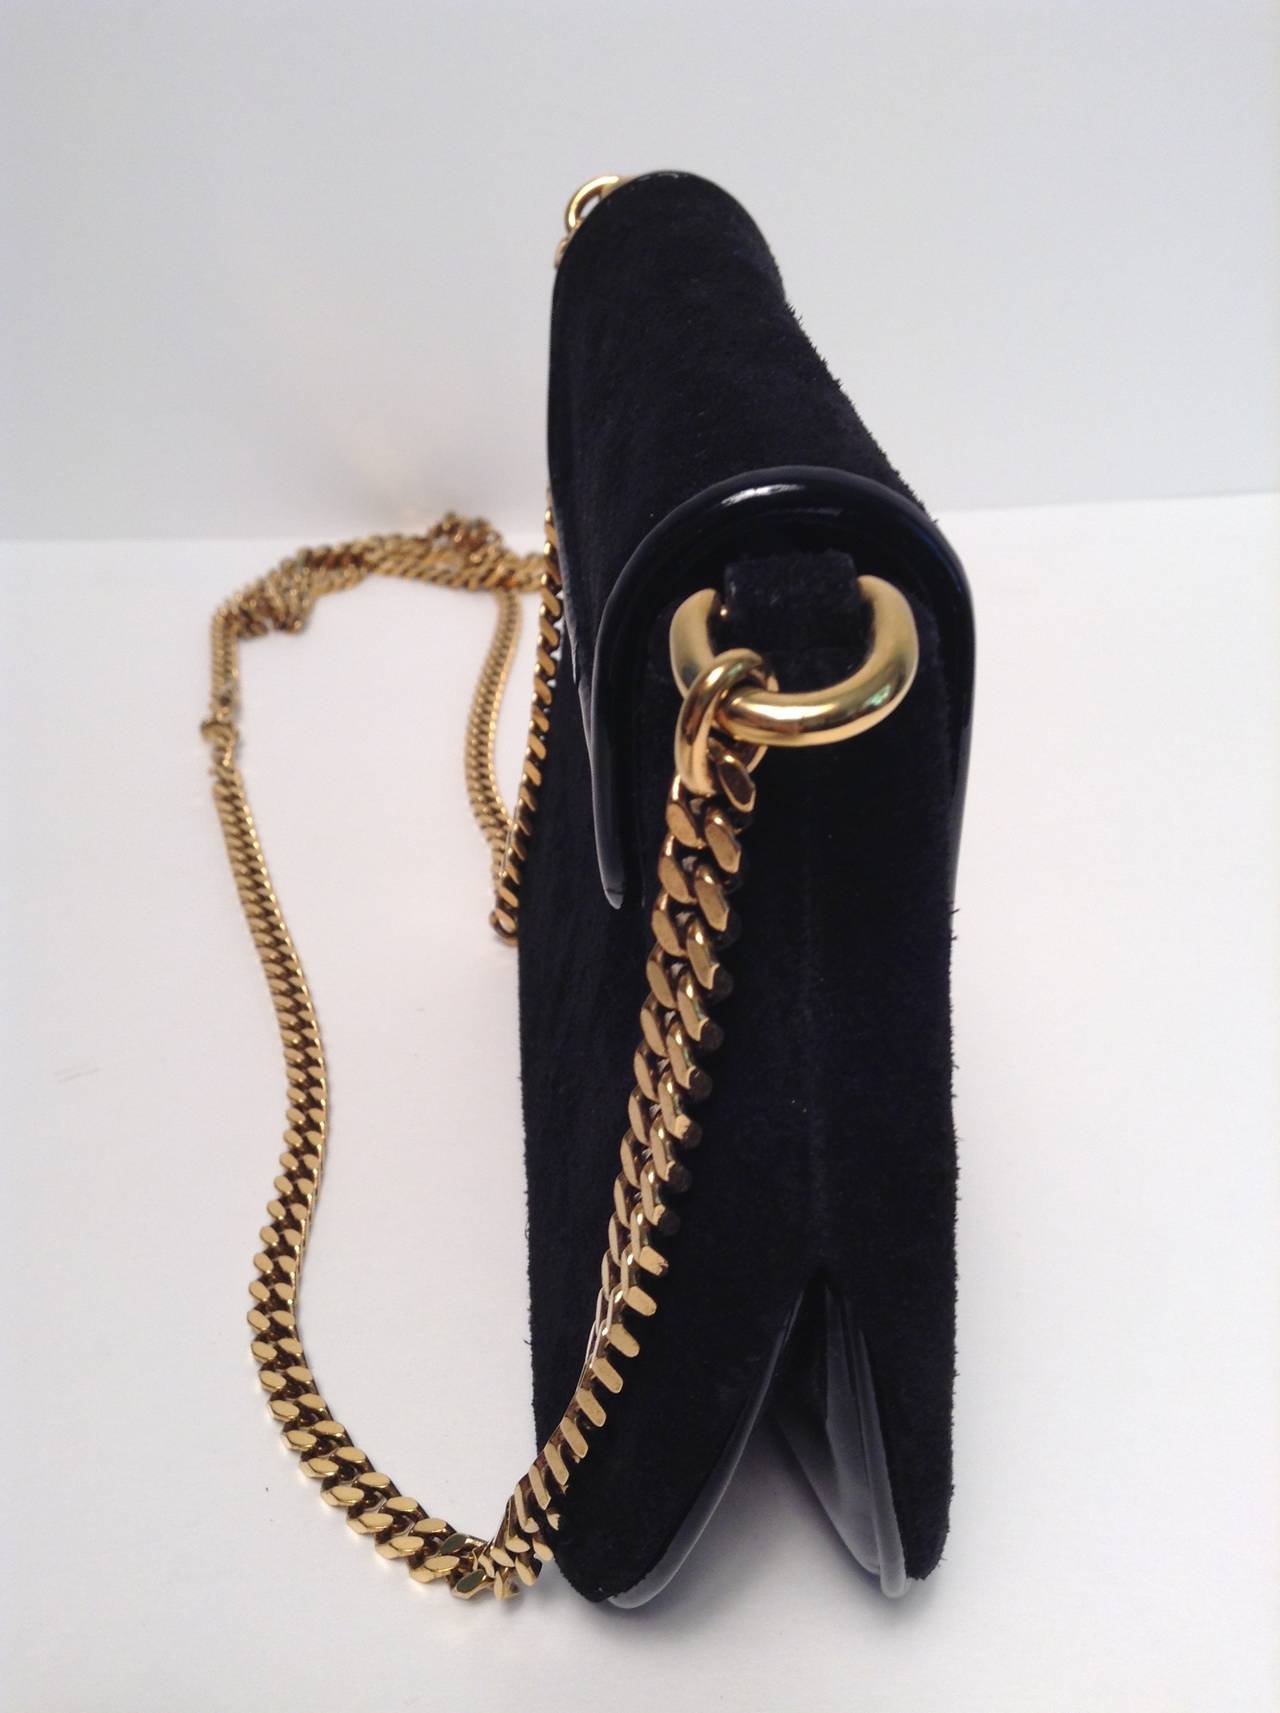 Gucci Black Suede Gold Chain Bag 1973 Reissue 3